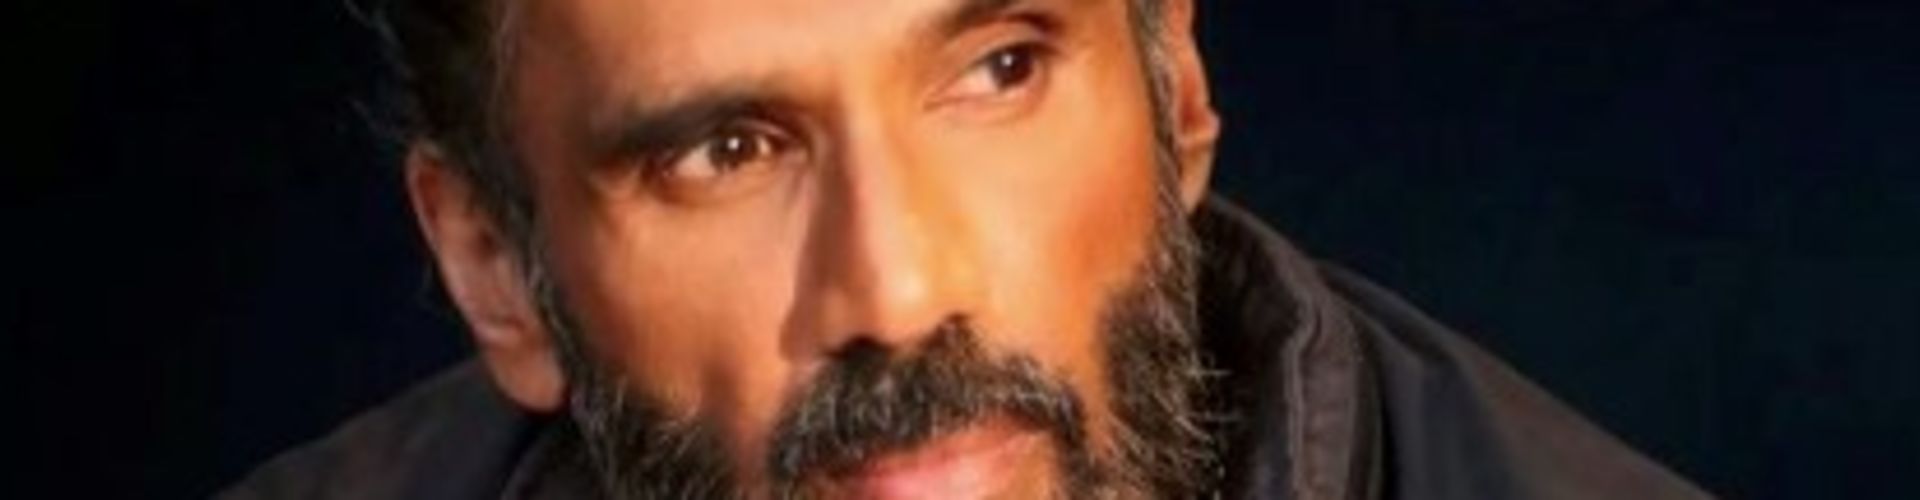 Suniel Shetty to make his digital debut with show 'Invisible Woman'